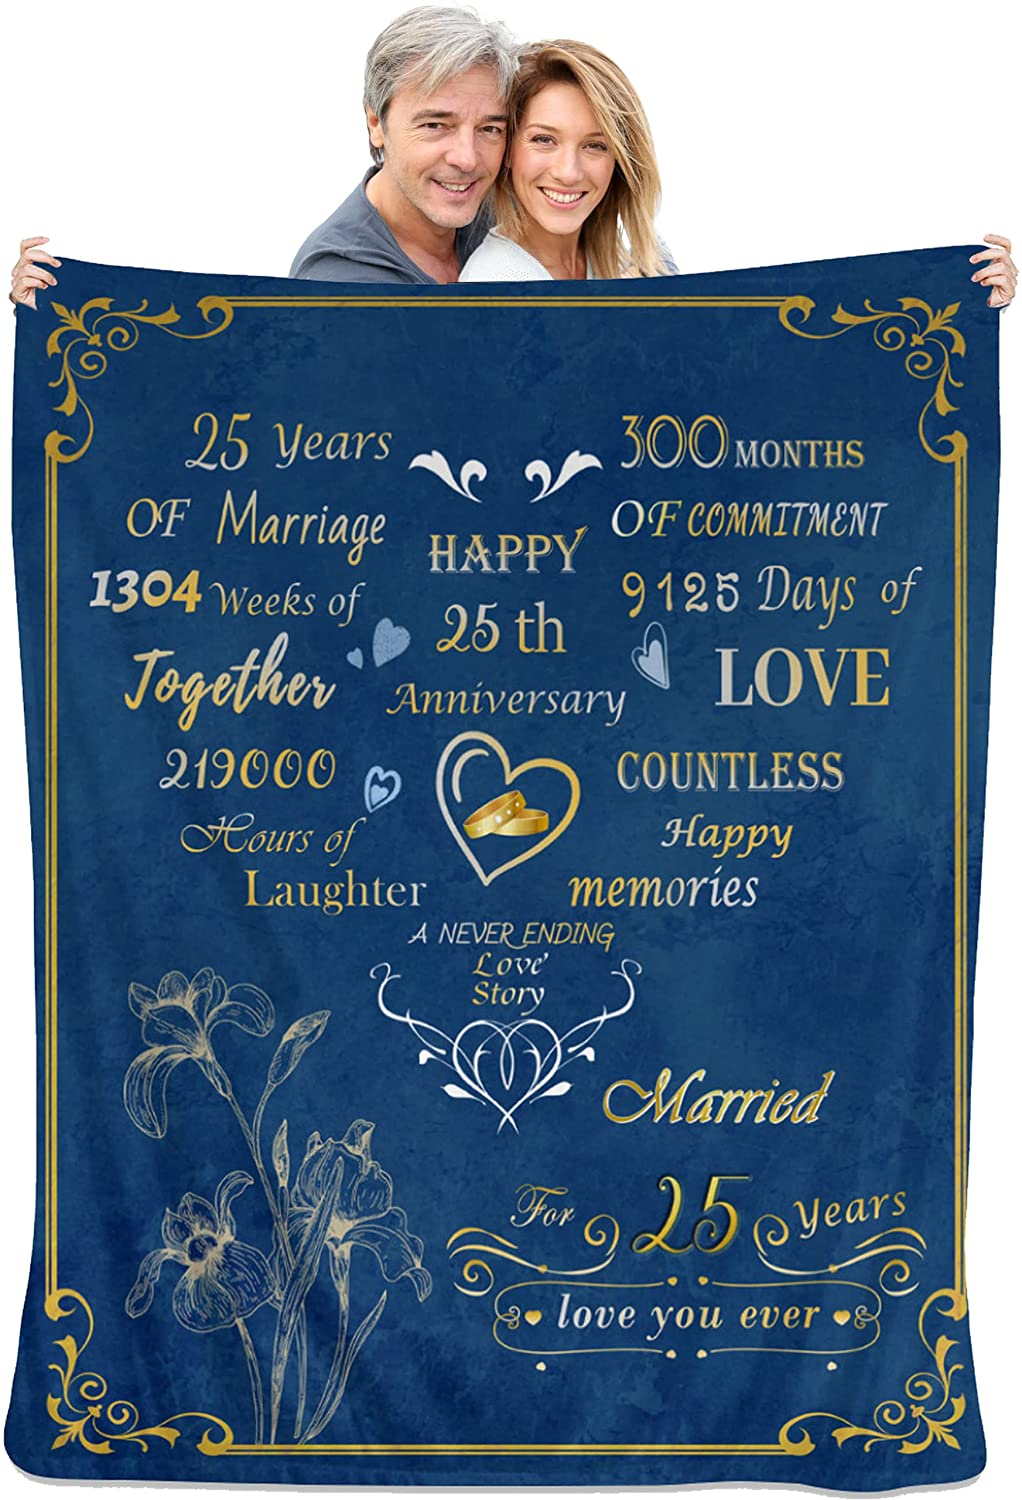 25Th Anniversary Blanket, 25Th Wedding Anniversary Couple Unique Gifts For Dad Mom Parents Grandparents, 25 Years Of Marriage Throw Blanket For Husband Wife